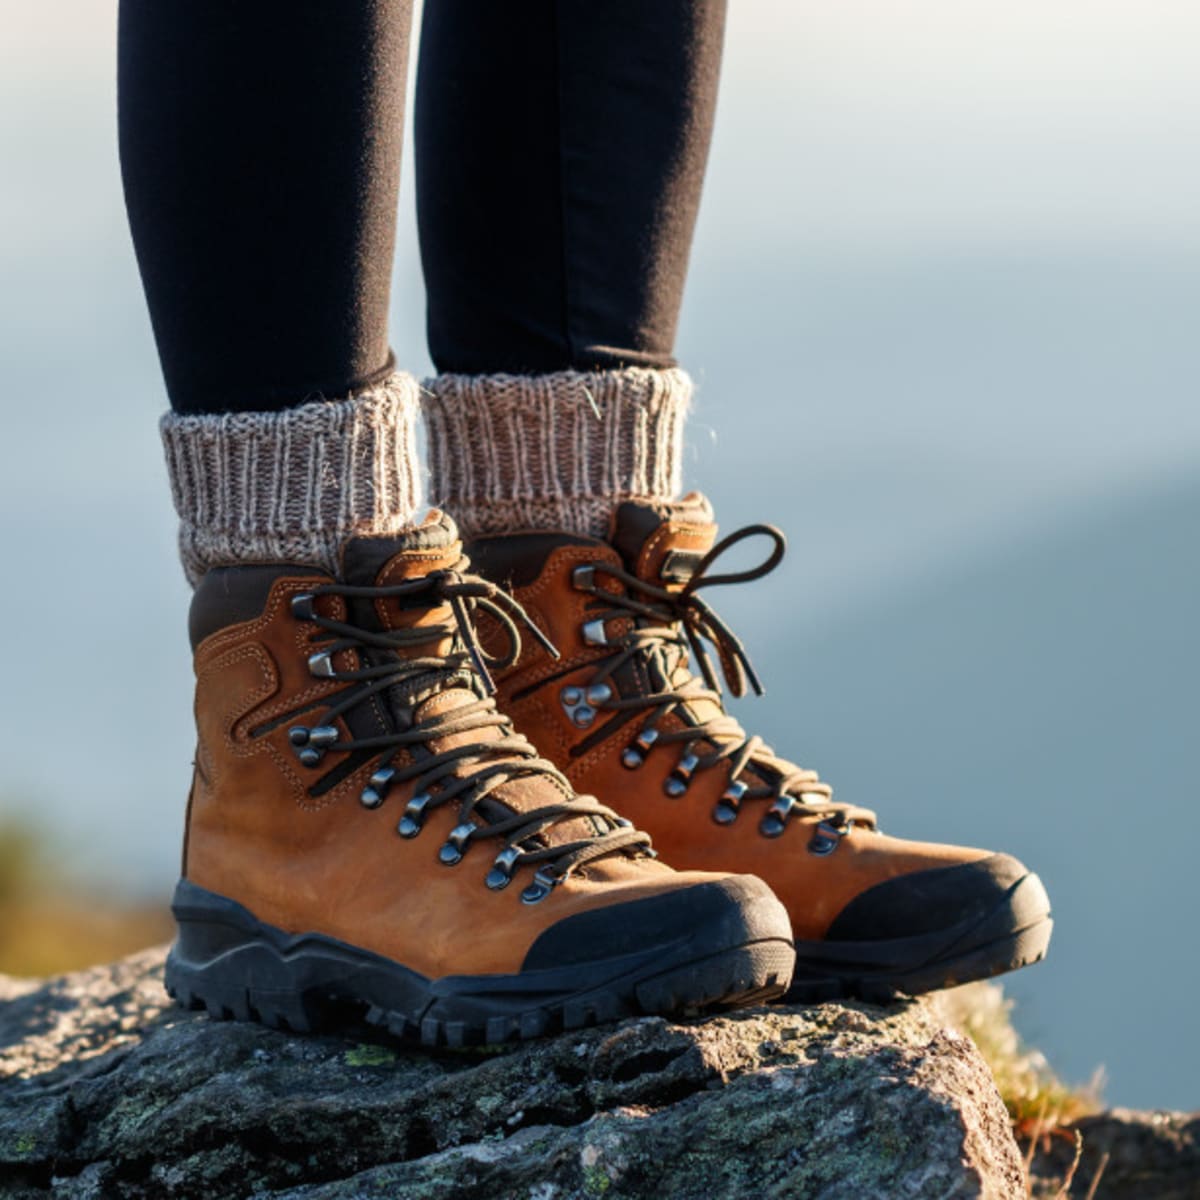 10 Best Hiking Gear For Women To Try In 2023